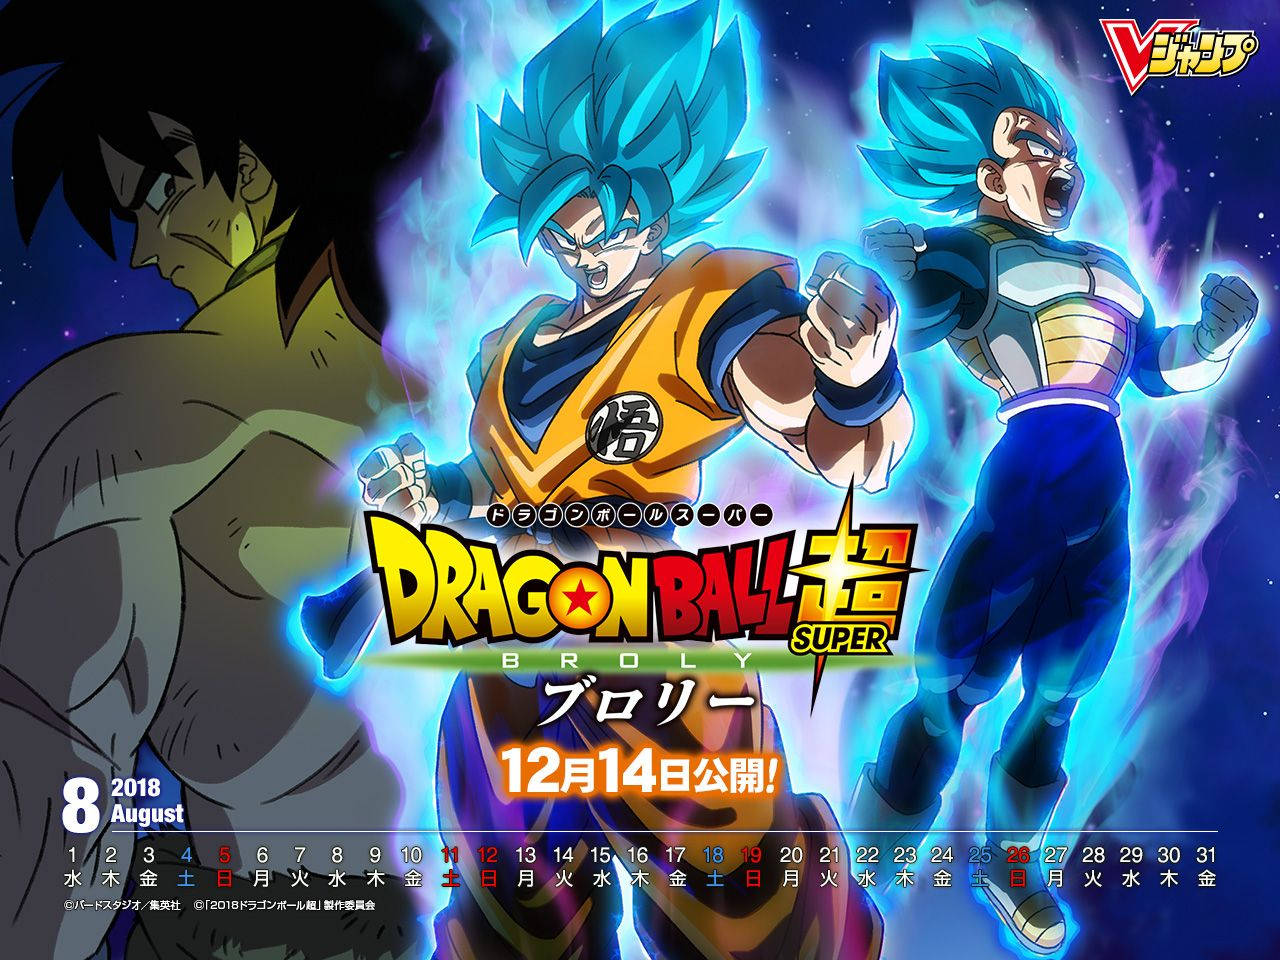 Be ready for an extreme Dragon Ball Super experience in 2019 with the release of ‘Broly’! Wallpaper